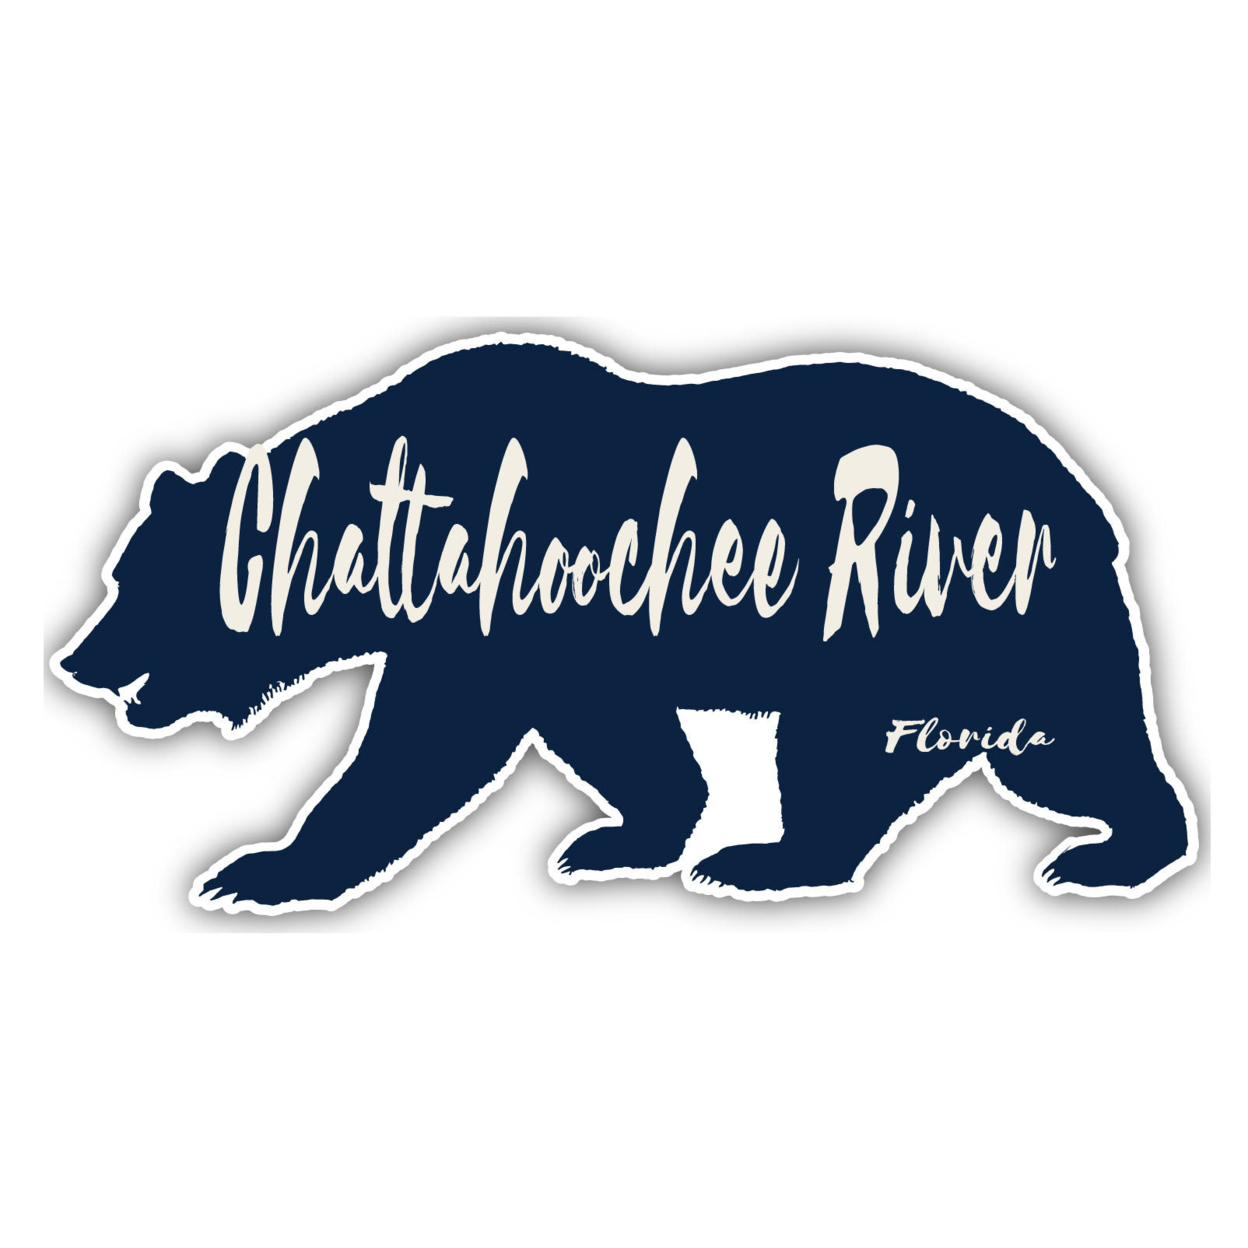 Chattahoochee River Florida Souvenir Decorative Stickers (Choose Theme And Size) - 4-Pack, 4-Inch, Bear